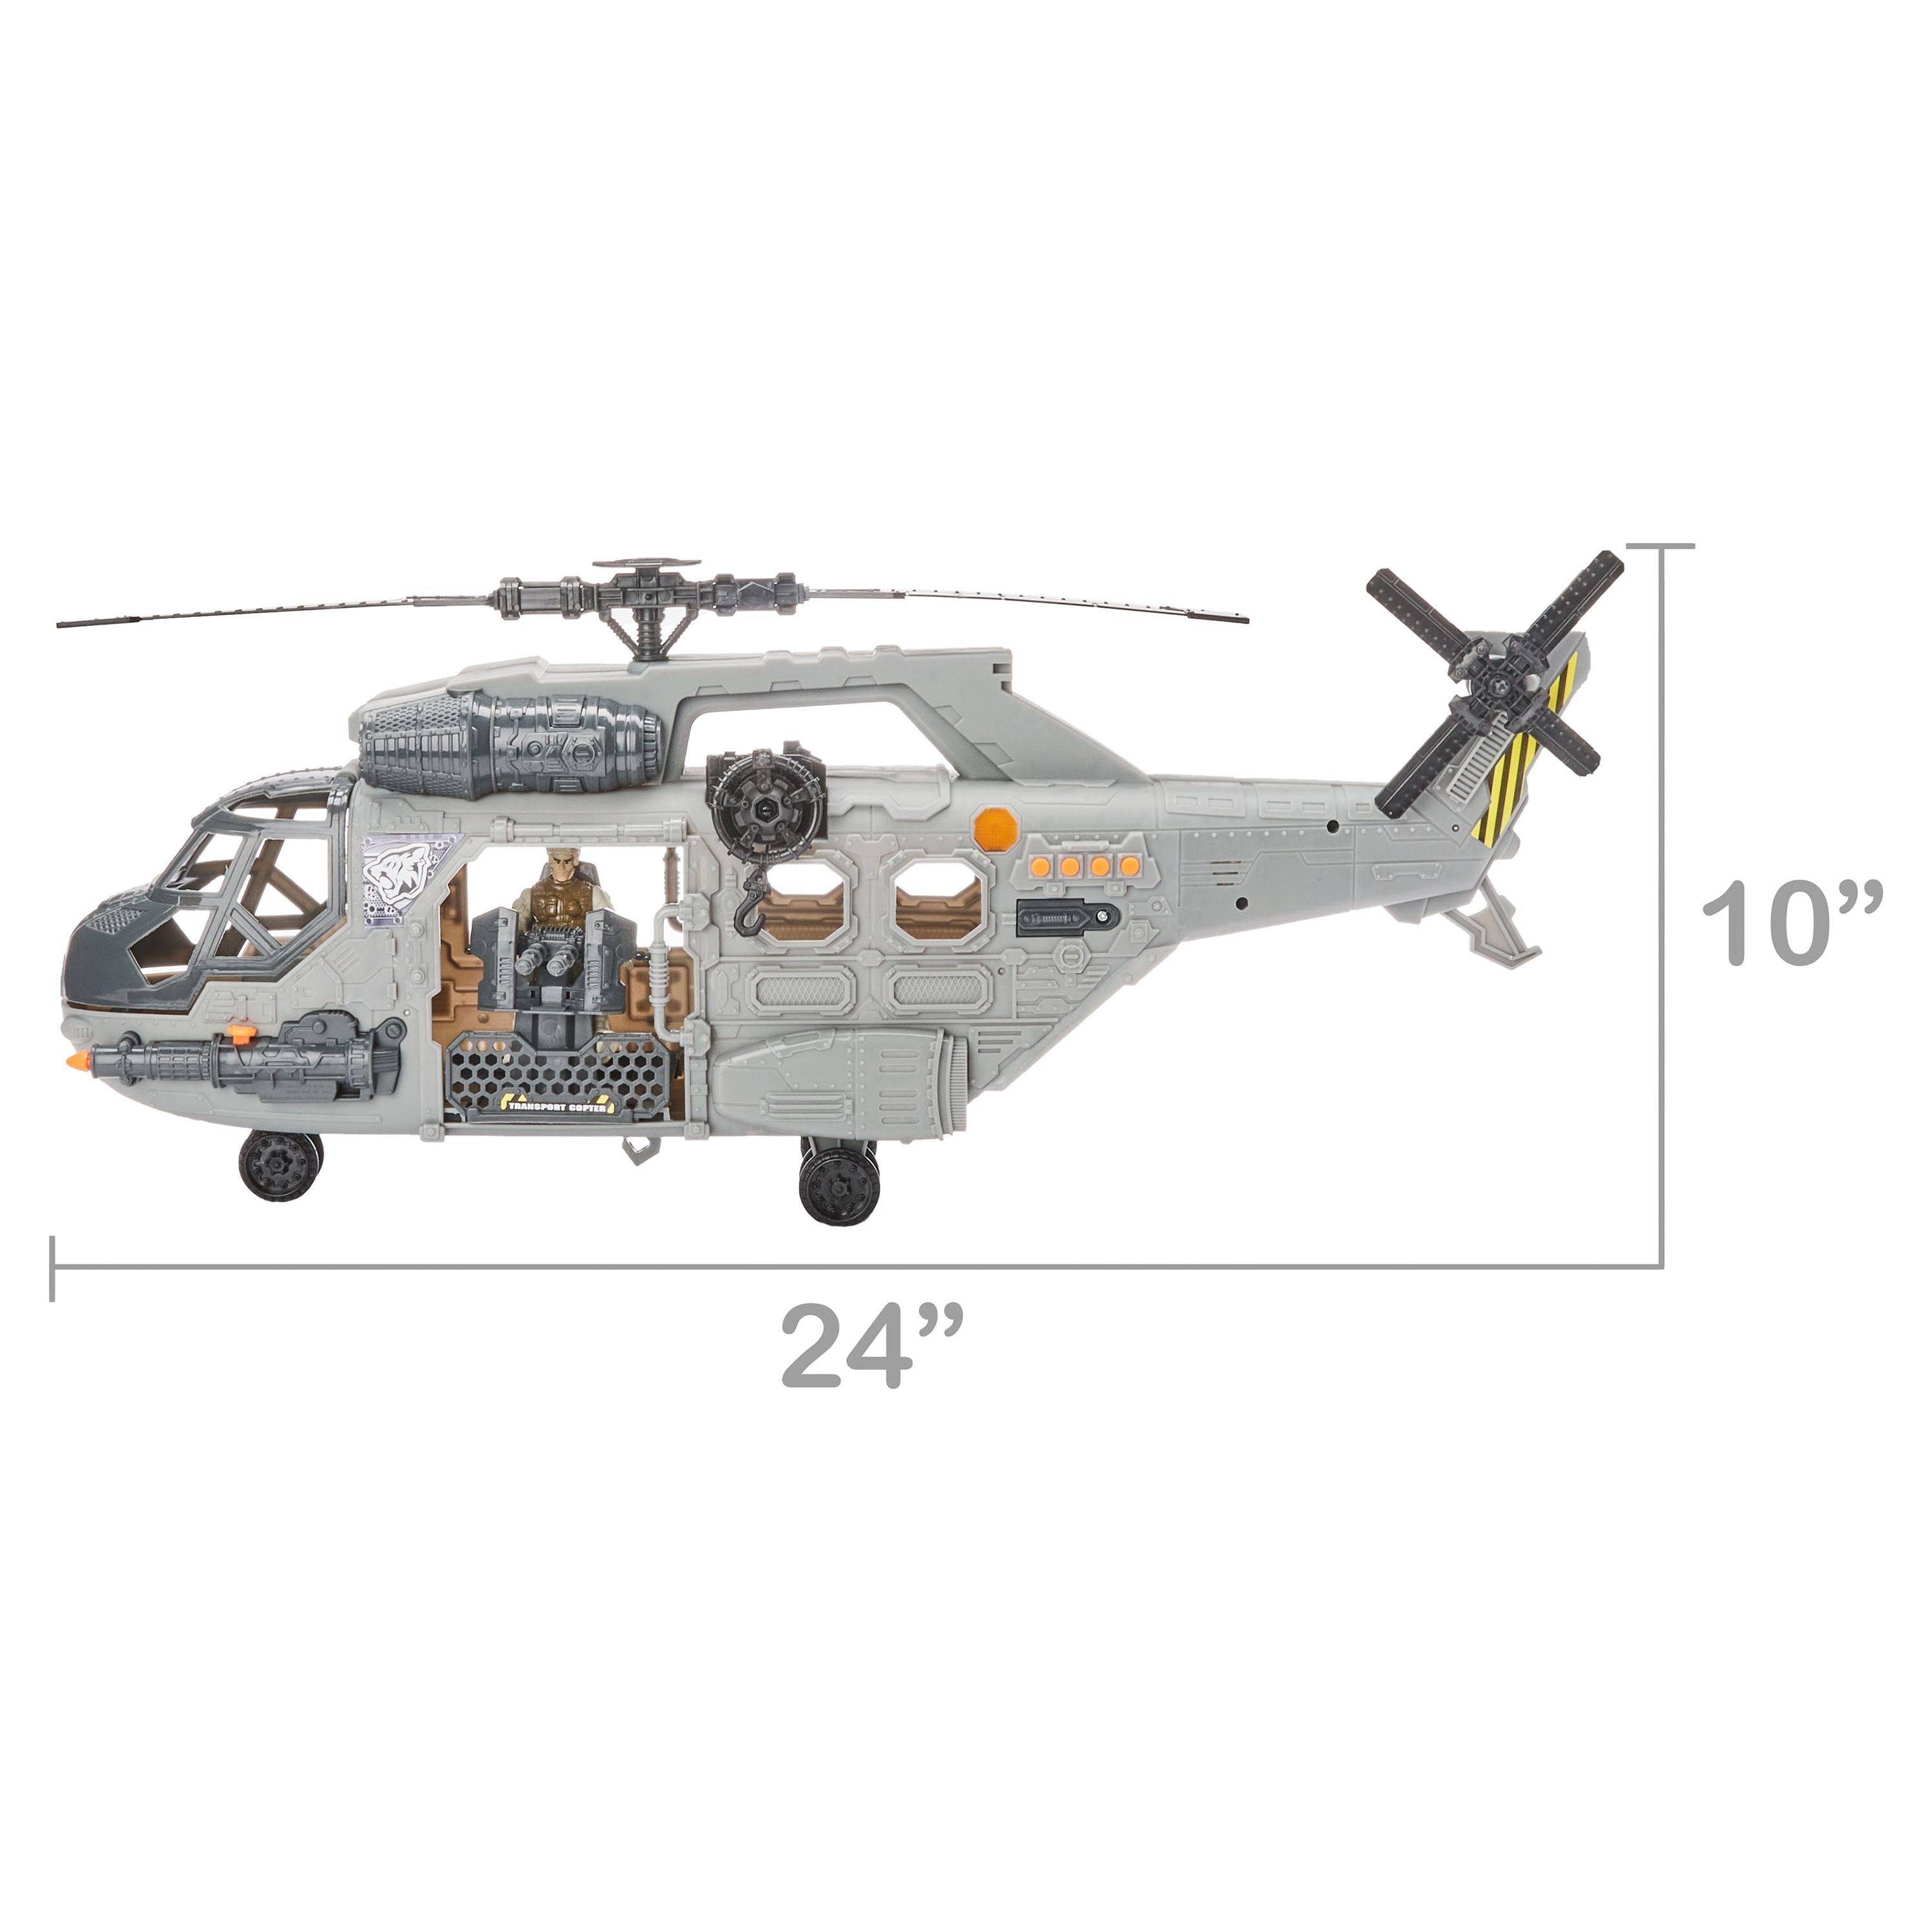 Kid Connection Military Giant Copter Play Set, 57 Pieces - image 5 of 5